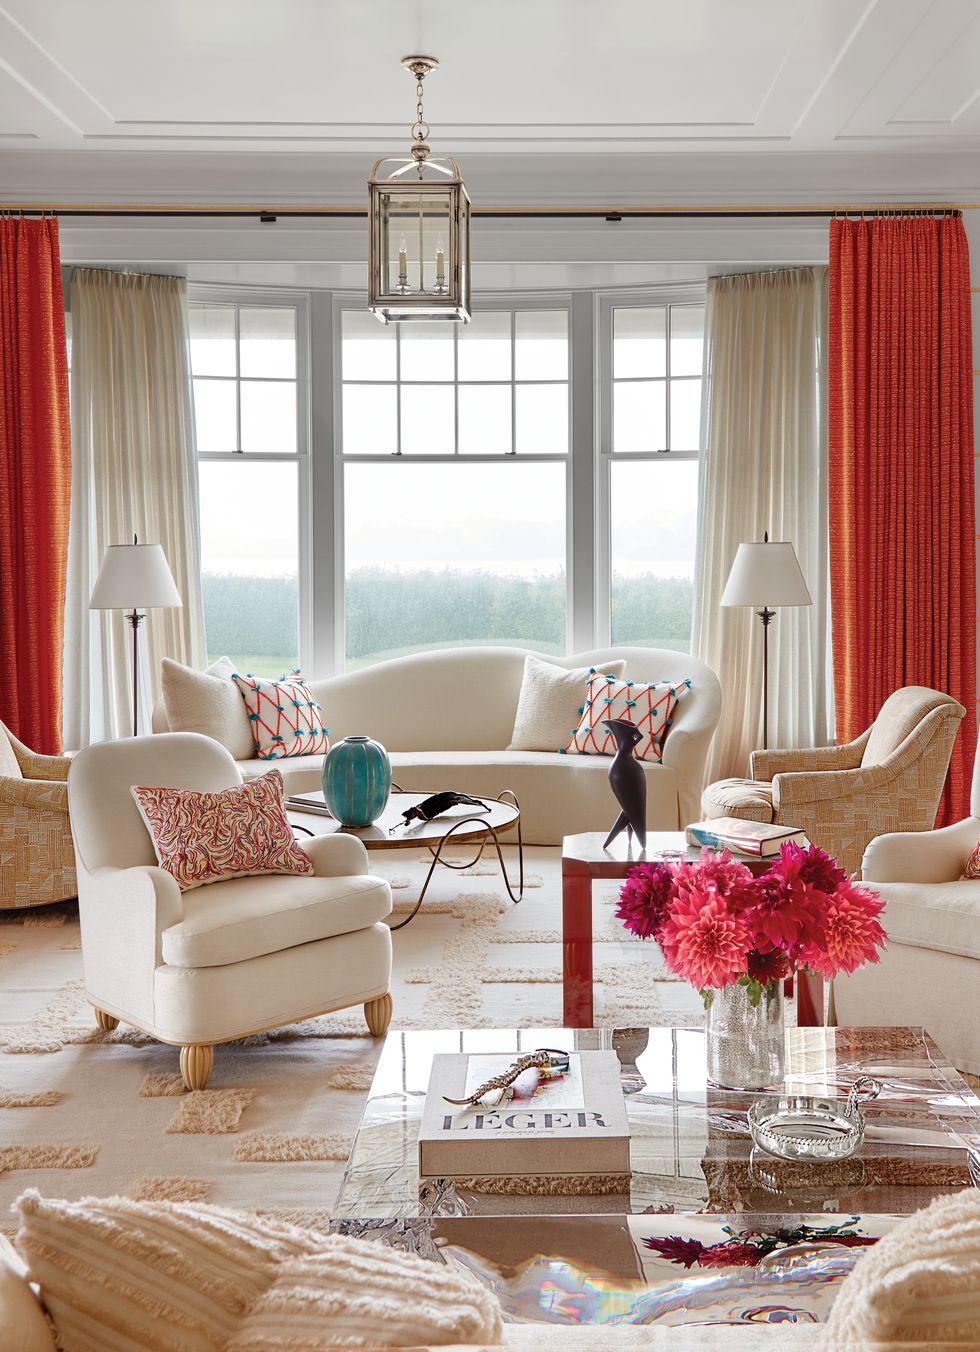 Living room with orange curtains